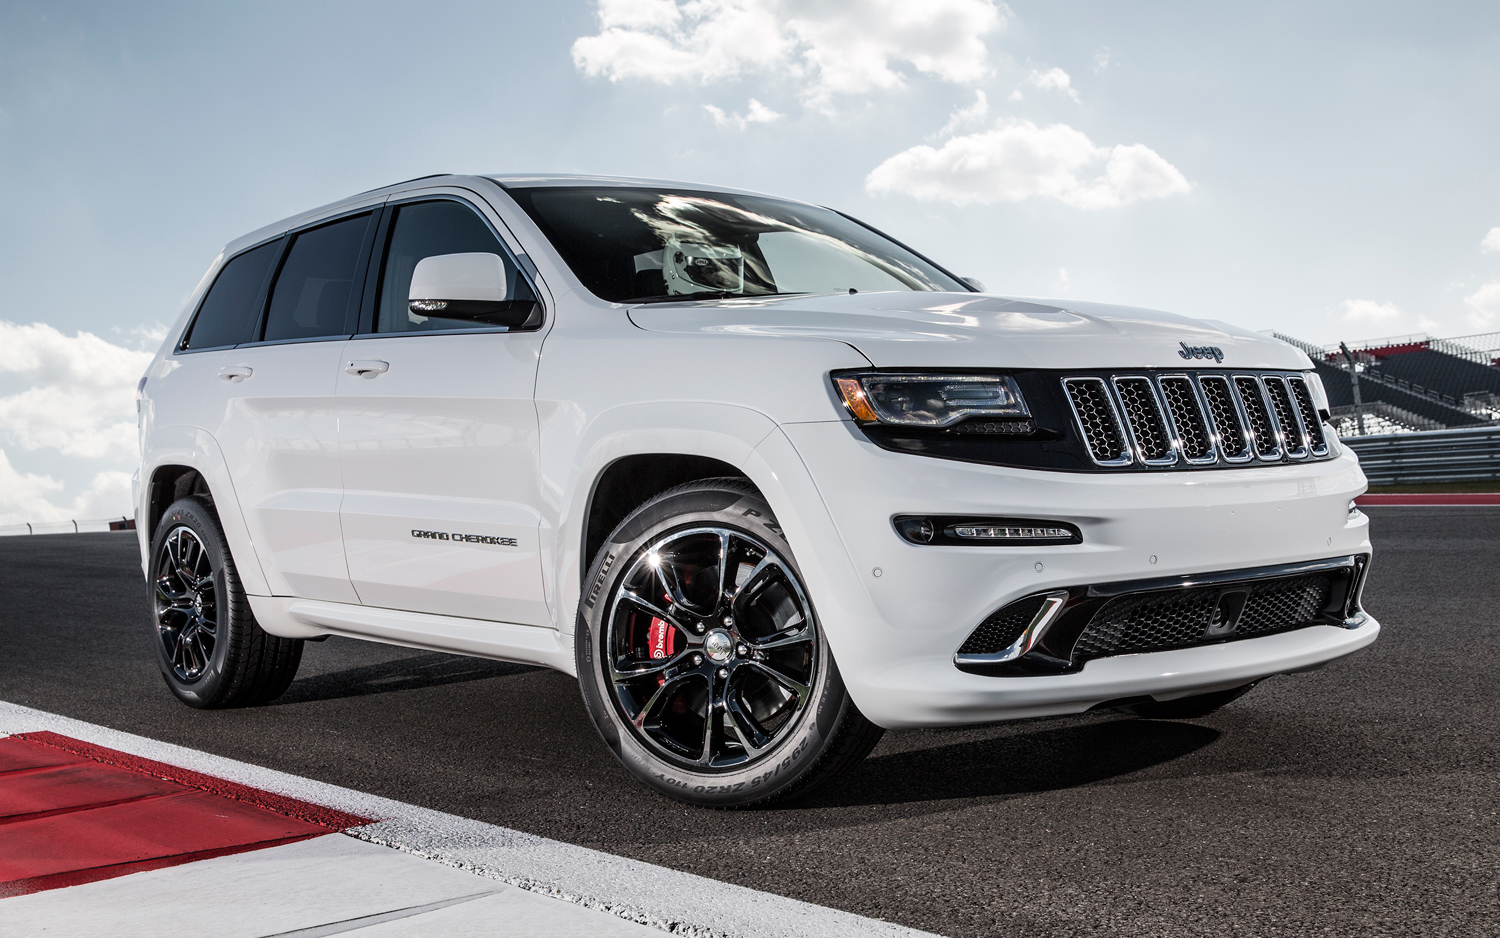 2014 Jeep Grand Cherokee SRT Track Drive Photo And Picture Sharing